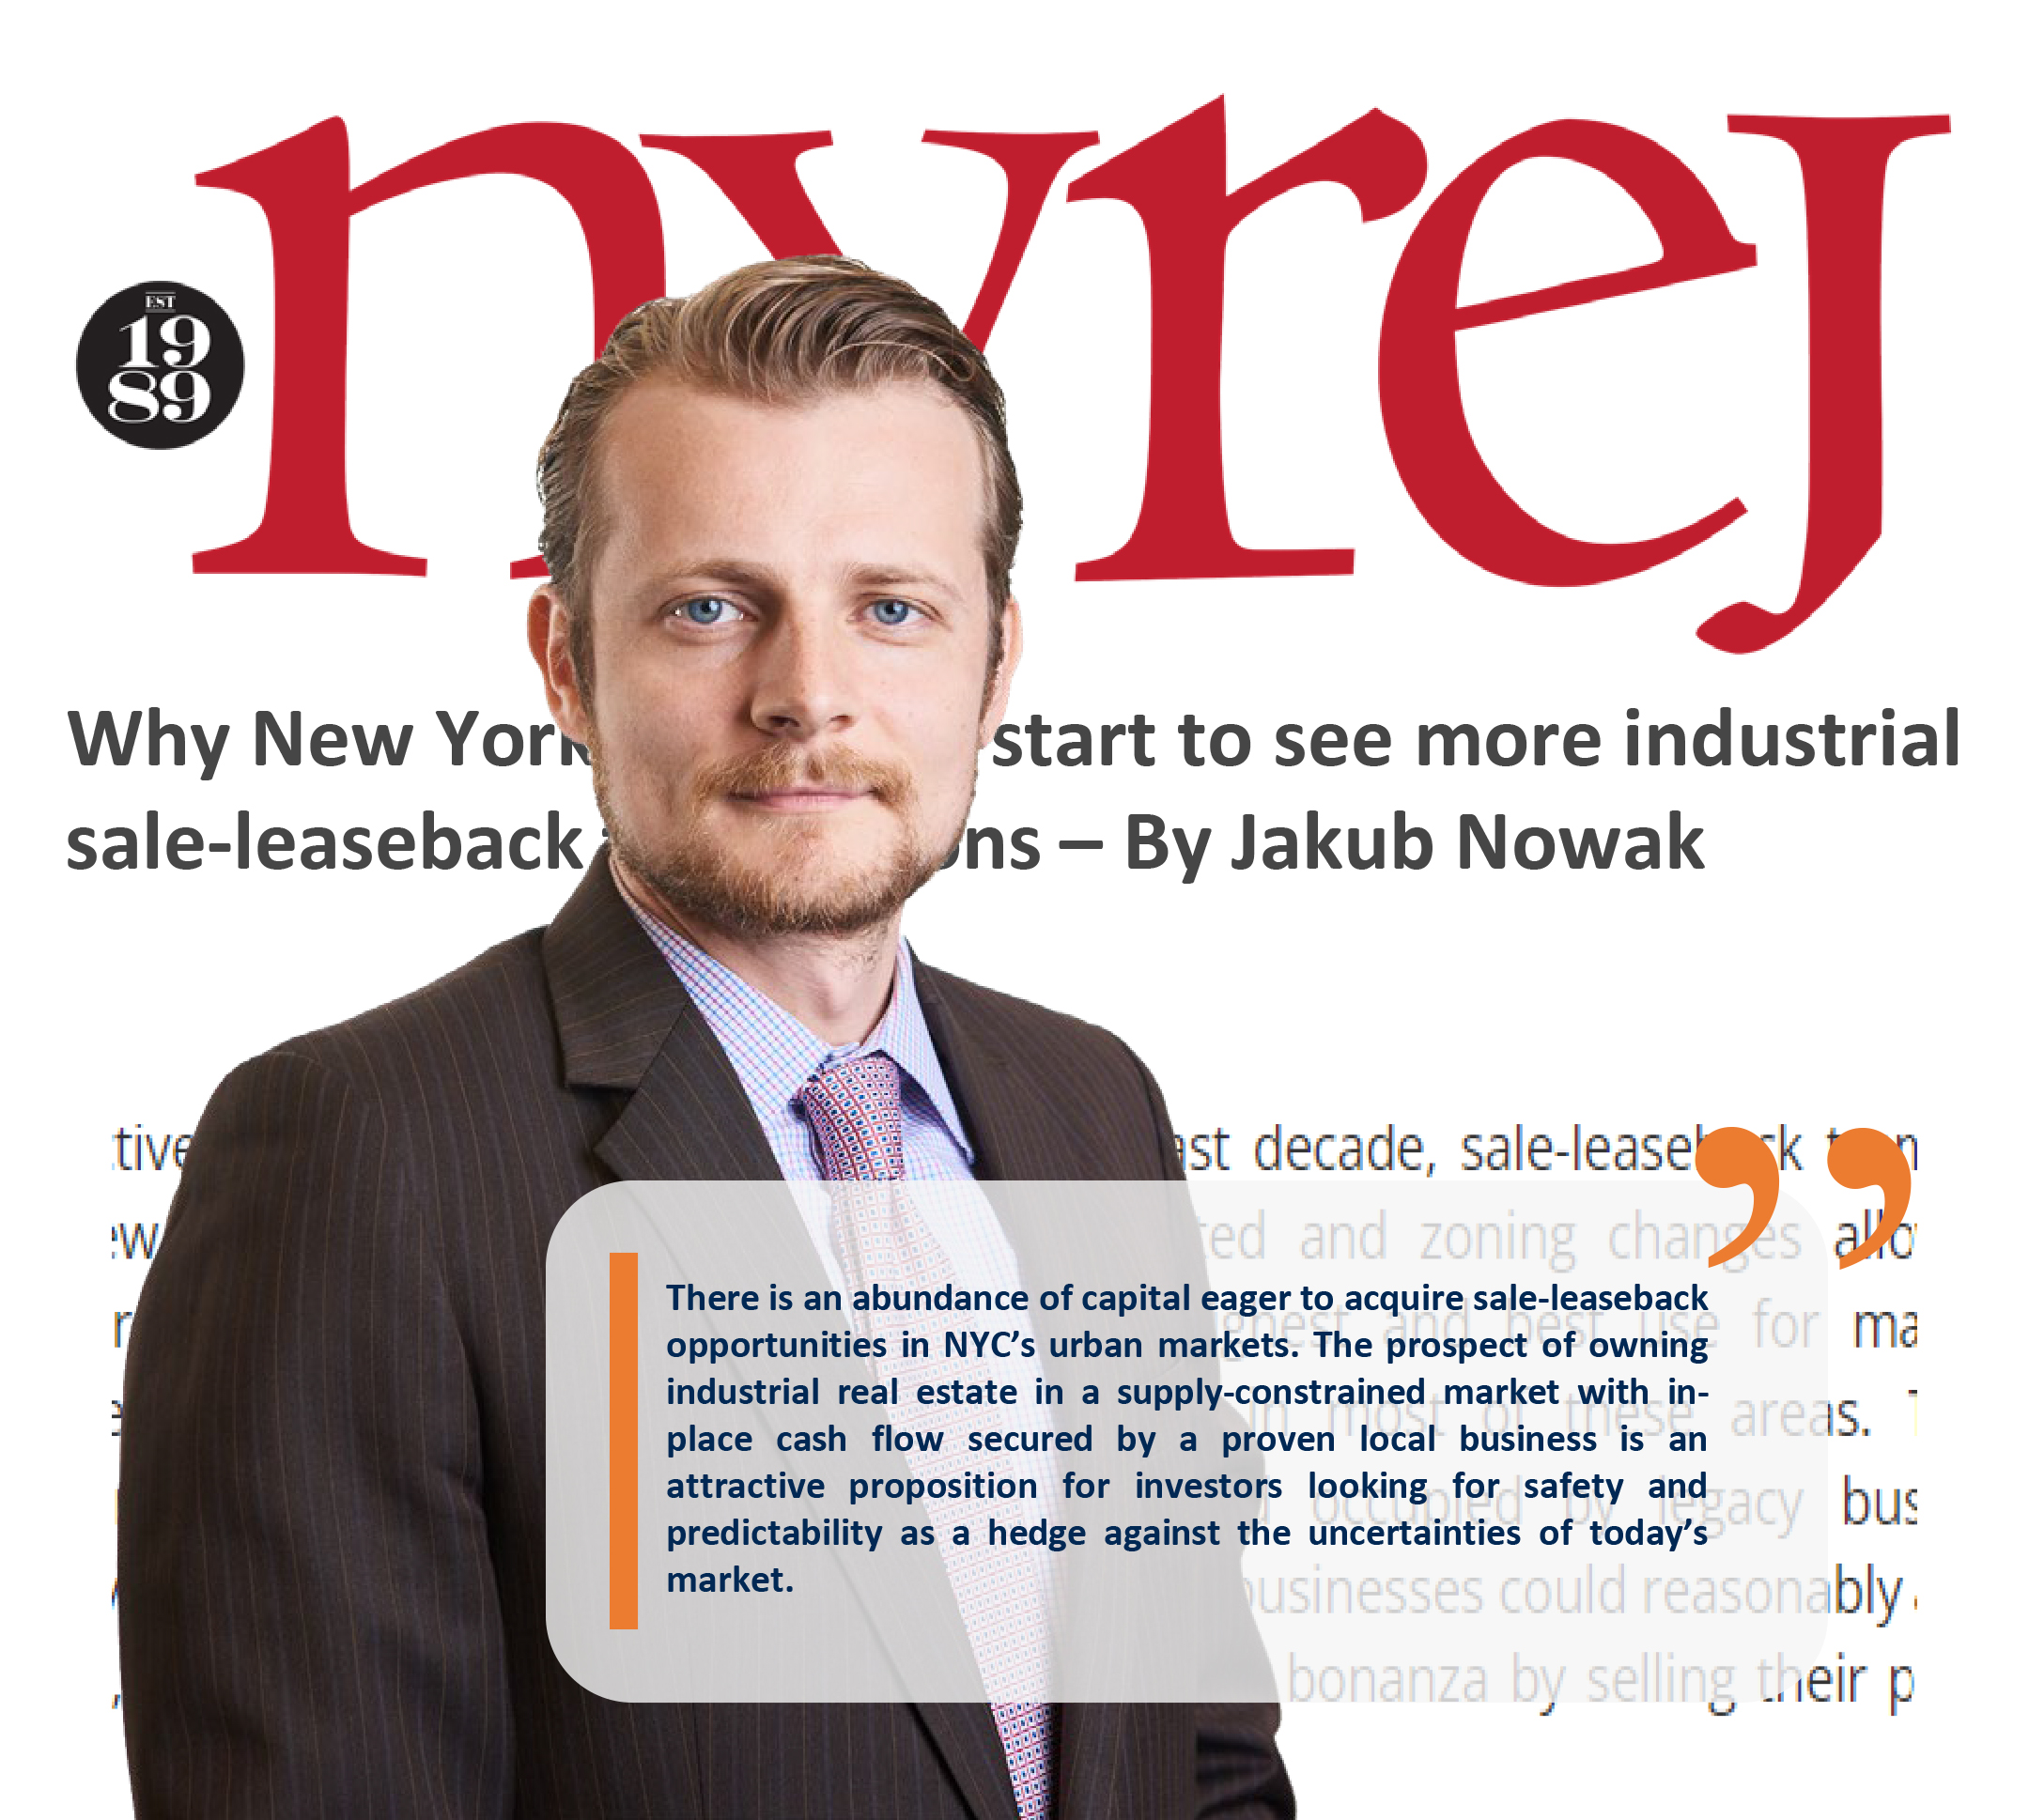 Why New York City could start to see more industrial sale-leaseback transactions - by Jakub Nowak